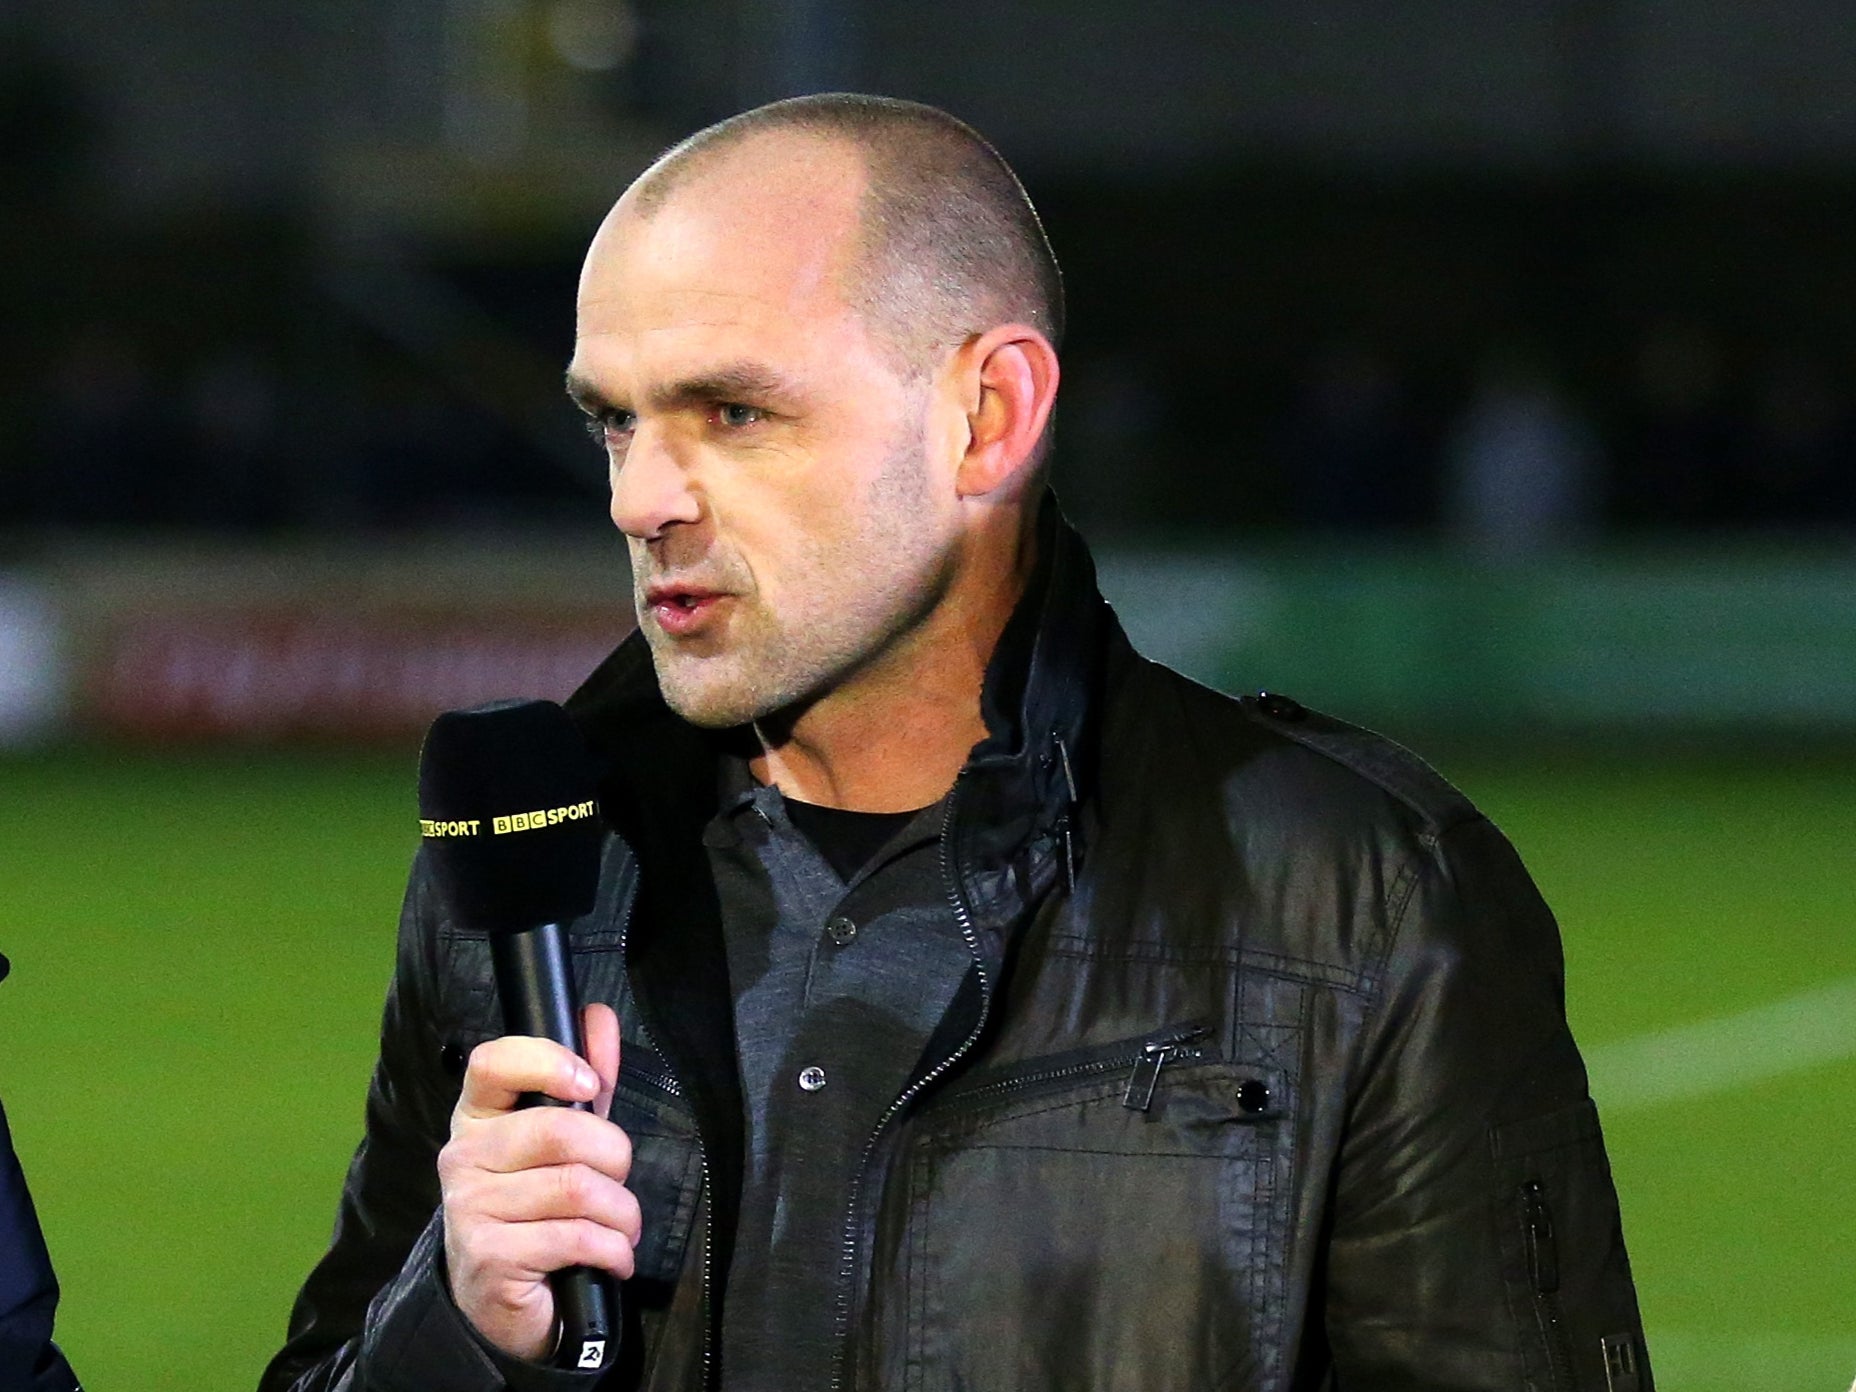 Danny Murphy revealed he had a cocaine addiction after retiring from football